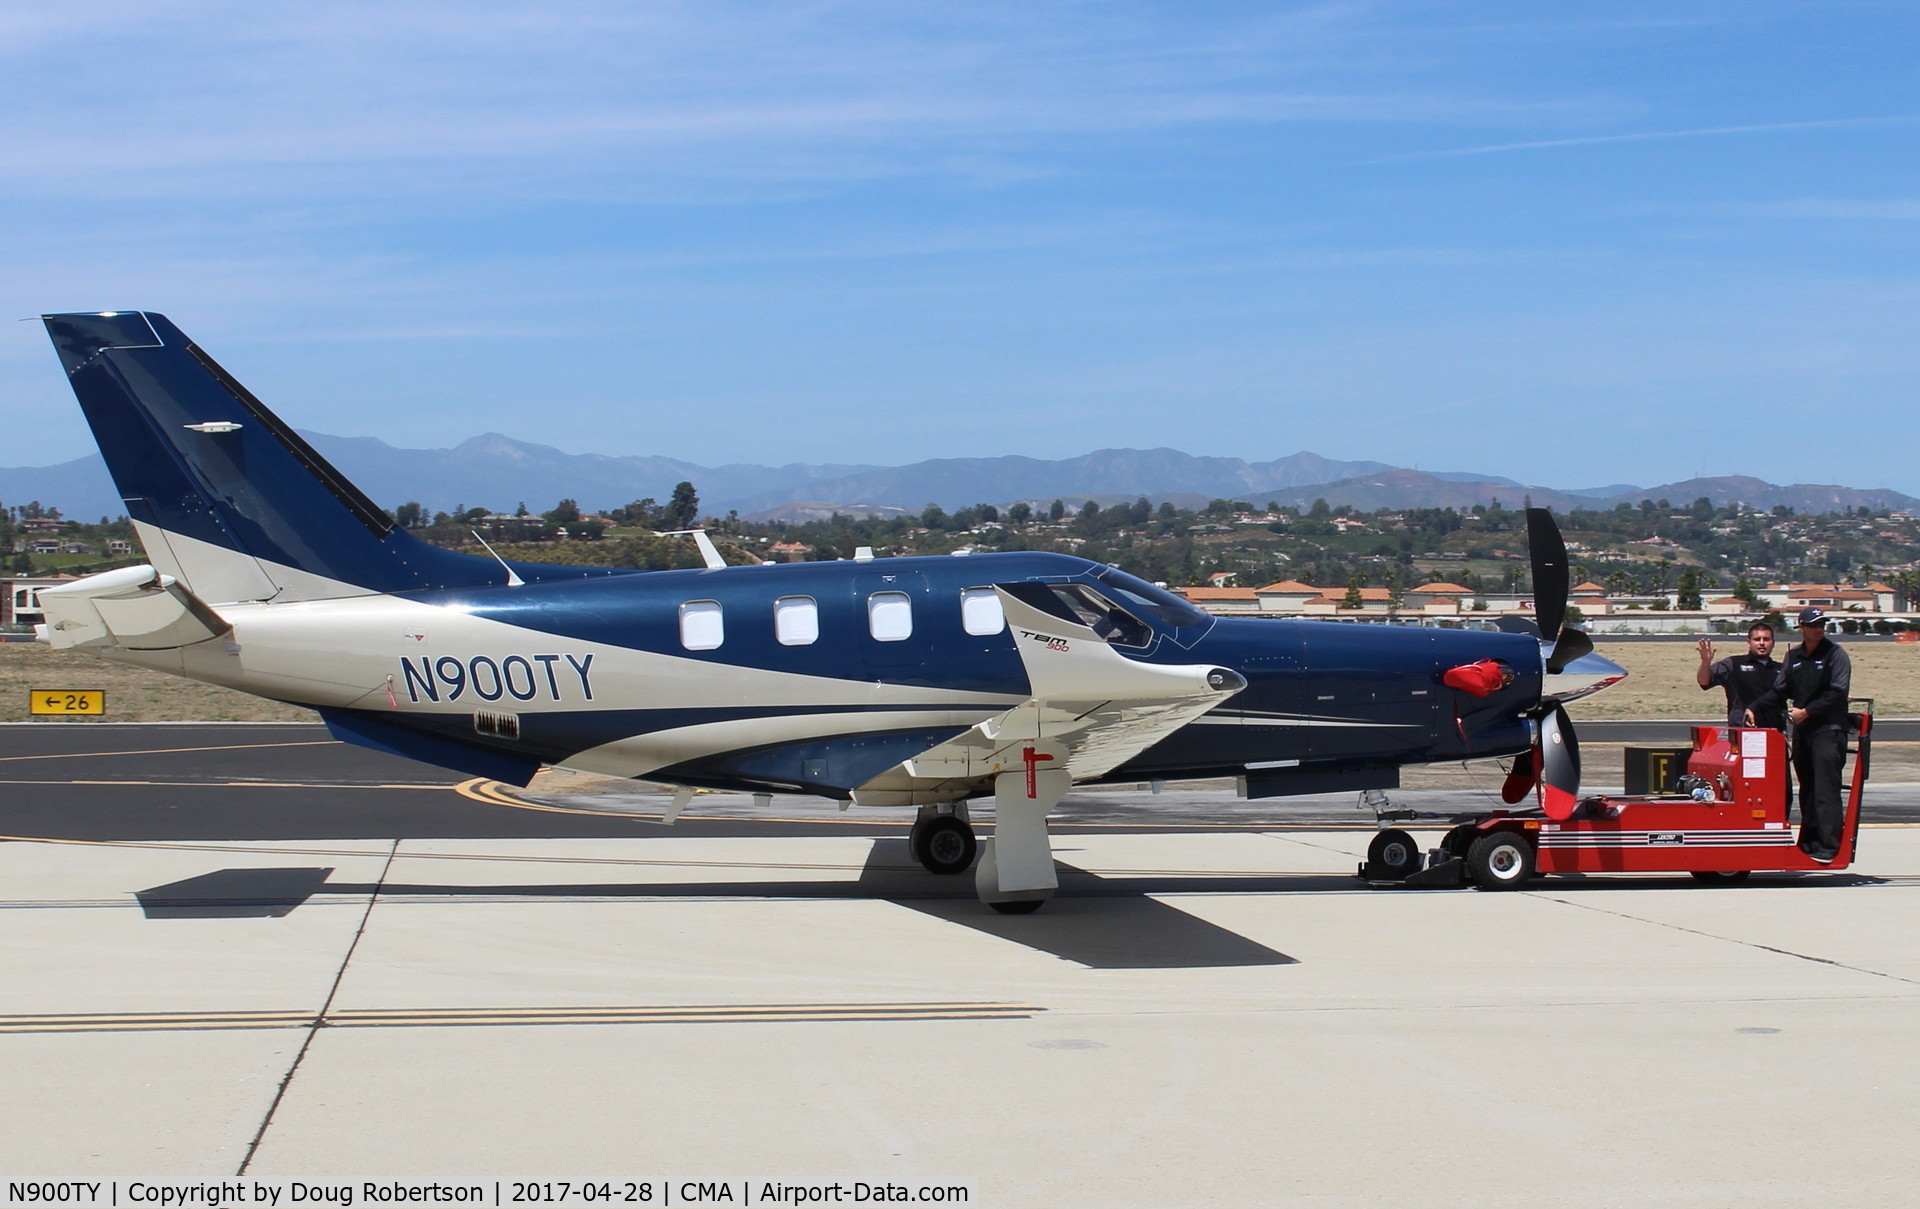 N900TY, 2015 Socata TBM 900 C/N 1084, 2015 Socata TBM 900, P&W(C)PT6A-66D Turboprop, in tow